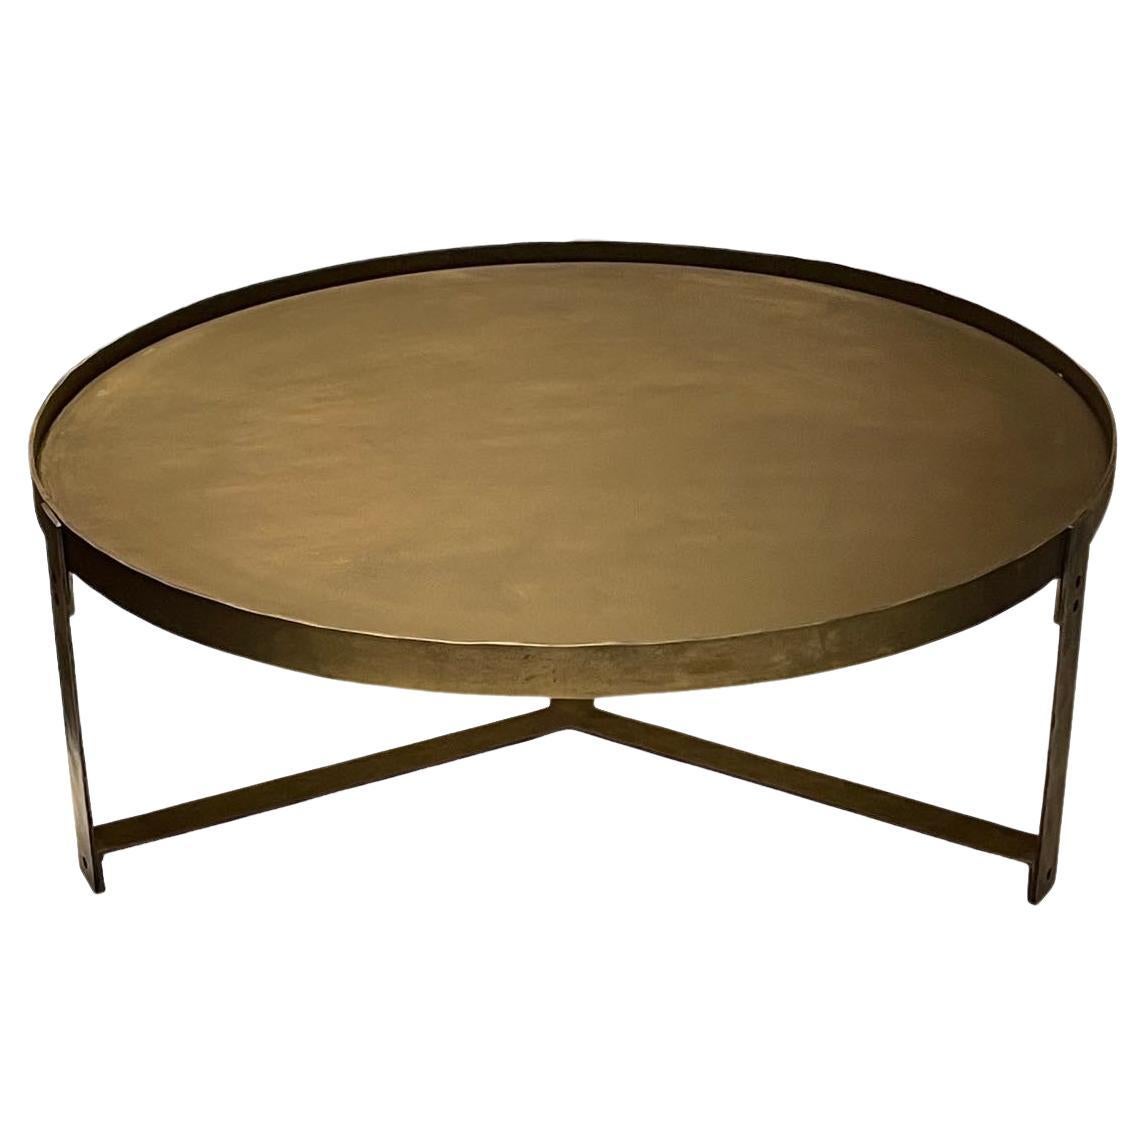 Round Brass Coffee Table with Self Tripod Legs, India, Contemporary